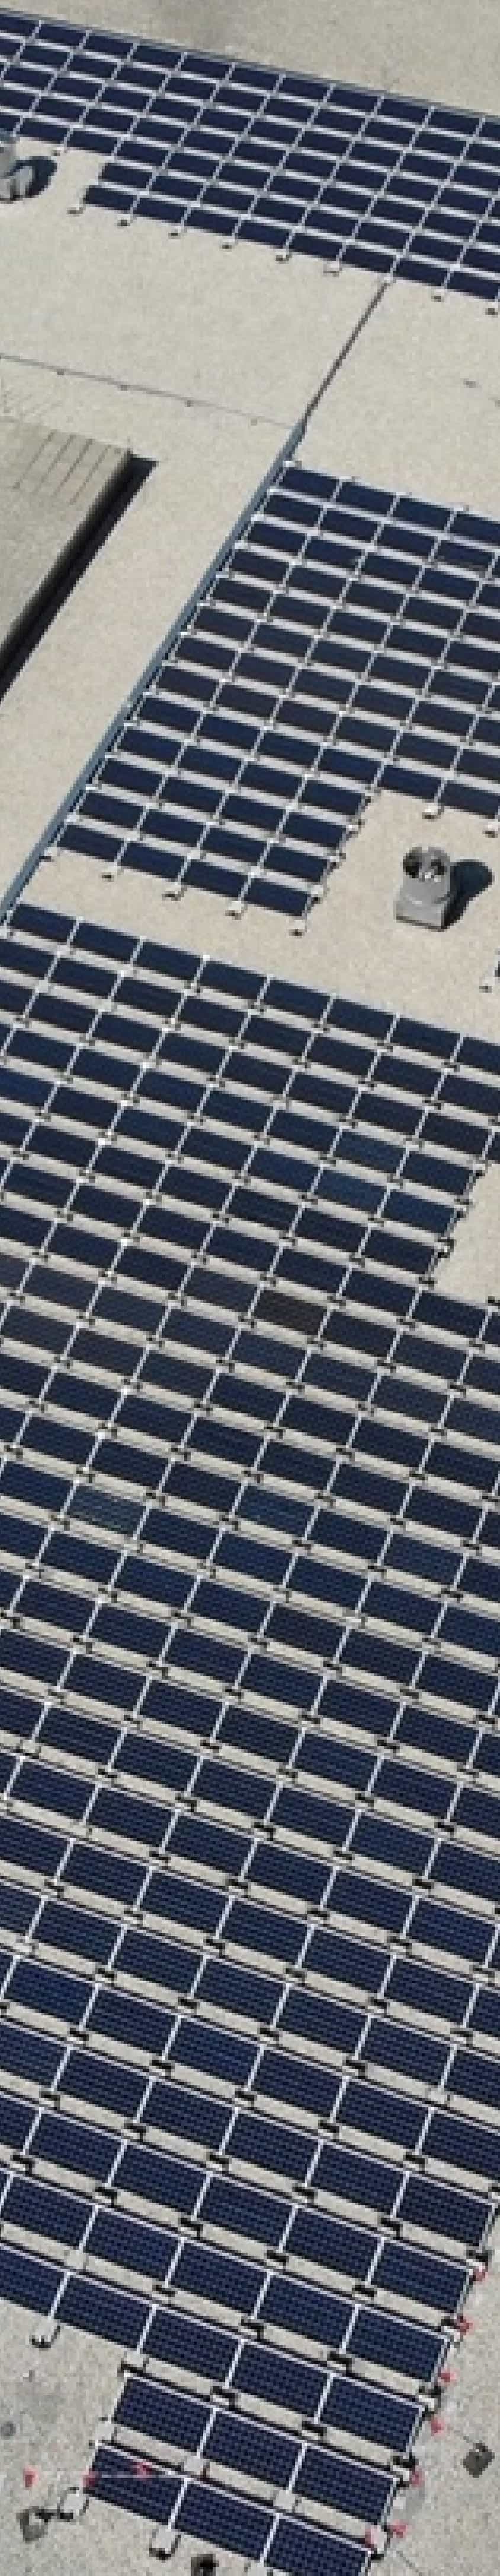 The image is of solar panels on a building roof. 